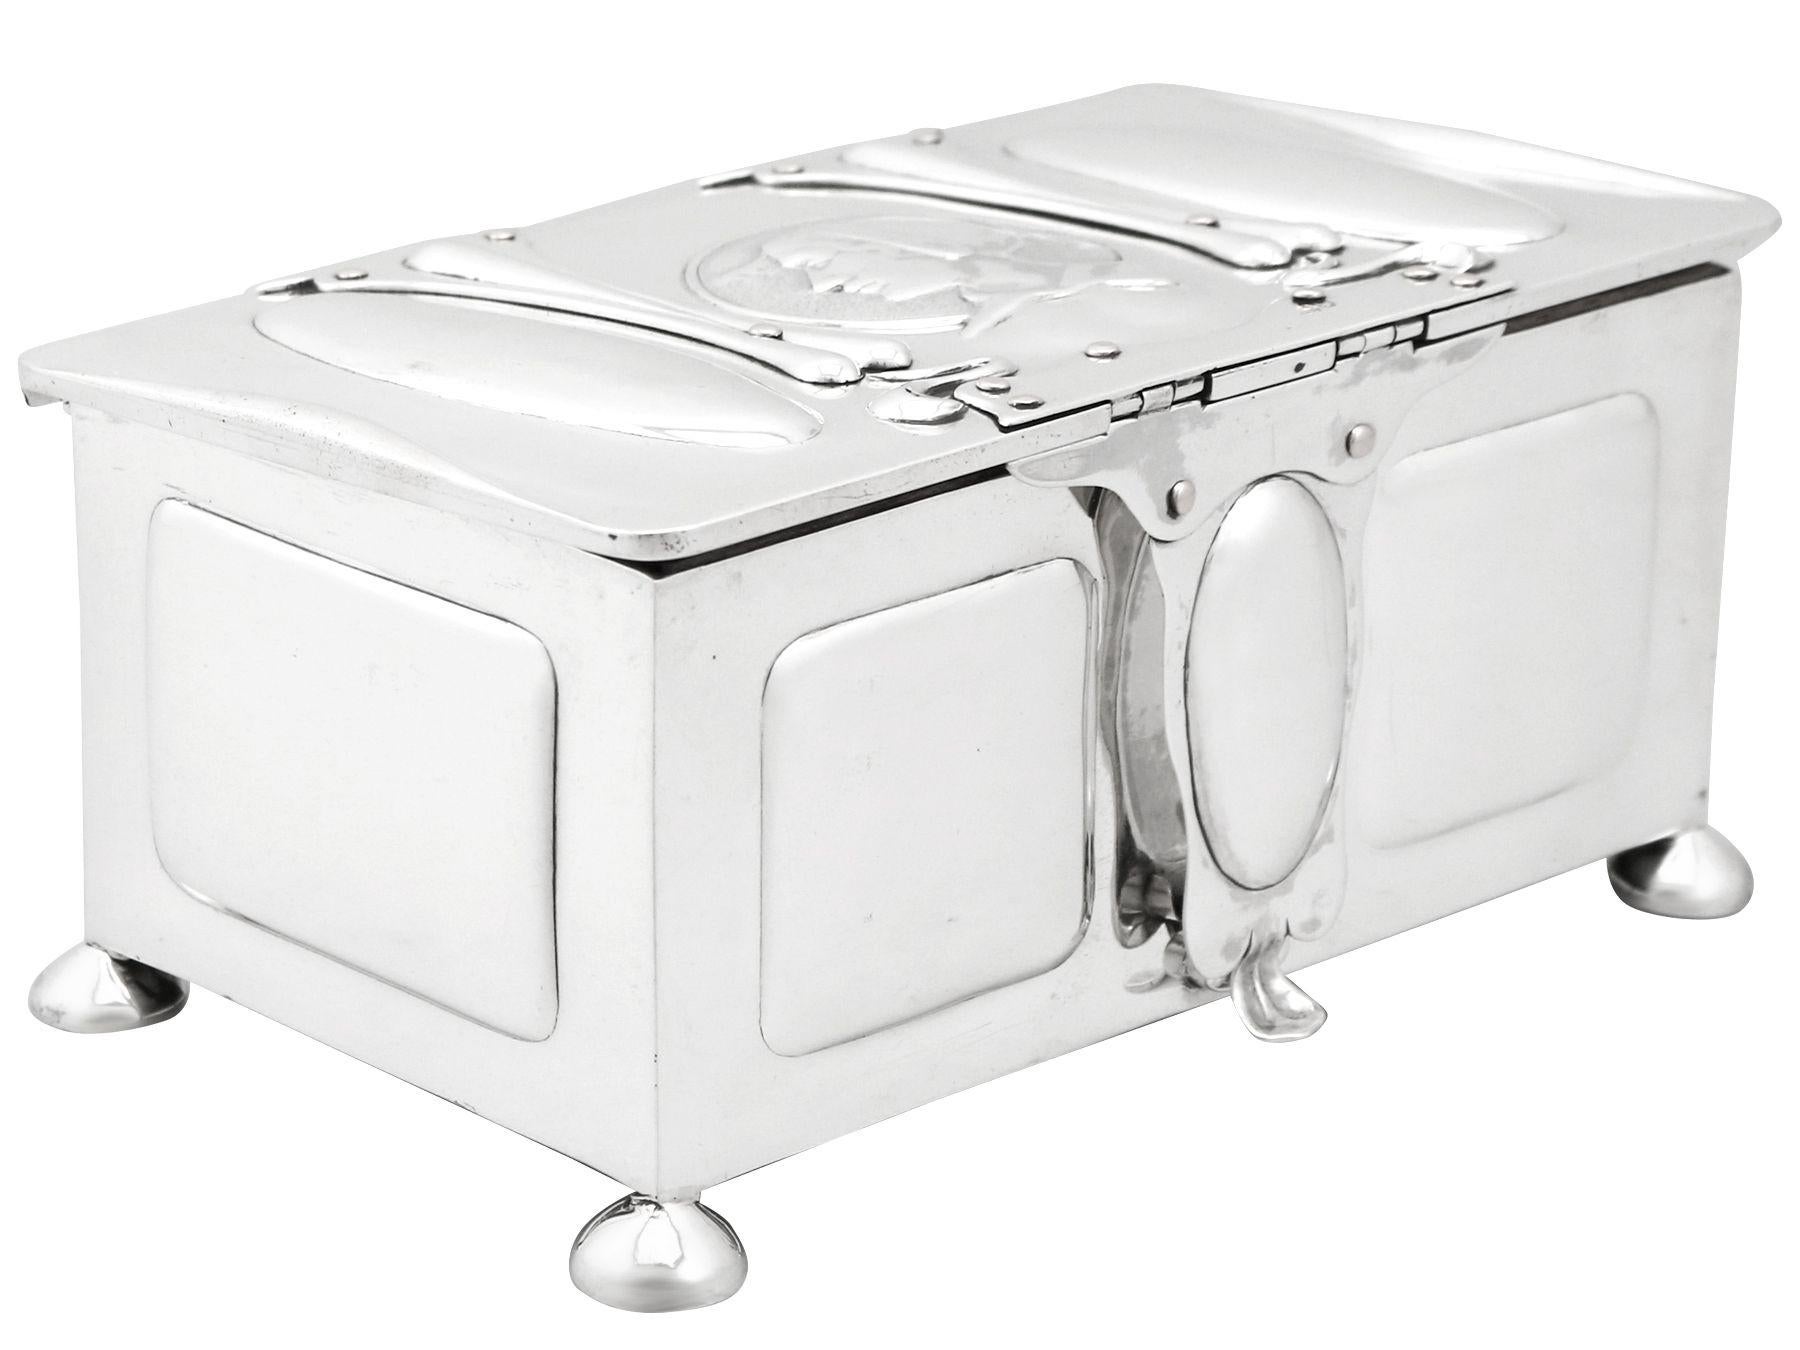 Antique Edwardian Art Nouveau Style Sterling Silver Jewelry Casket In Excellent Condition For Sale In Jesmond, Newcastle Upon Tyne